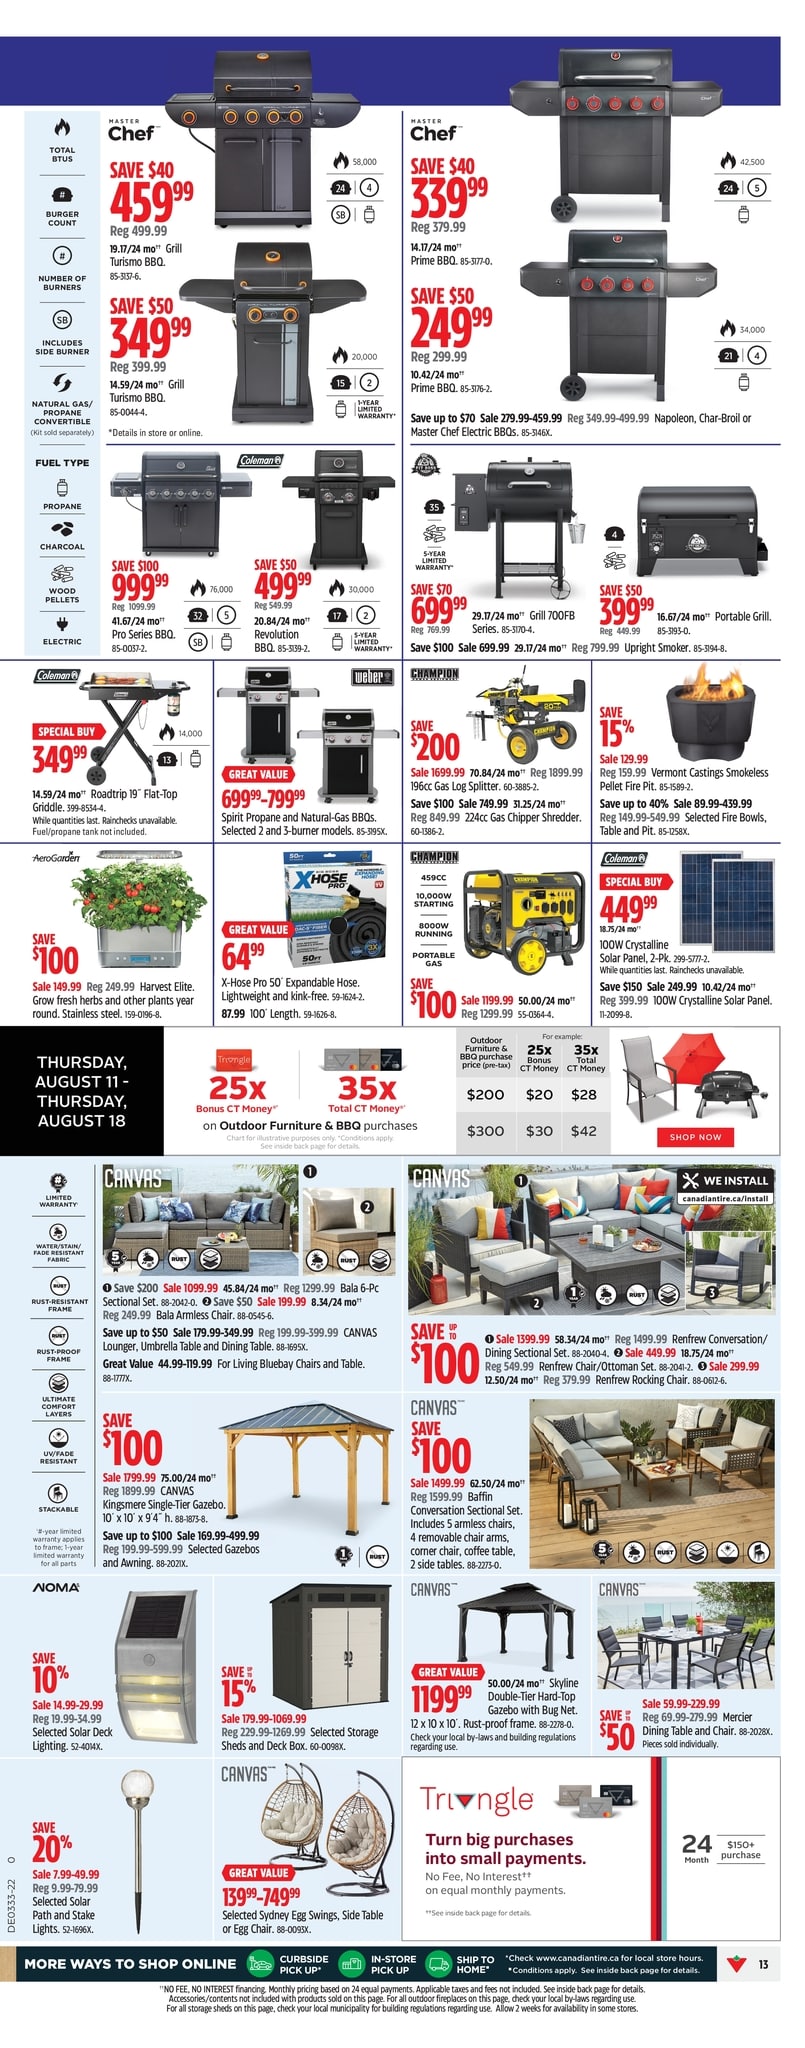 Canadian Tire - Weekly Flyer Specials - Page 13